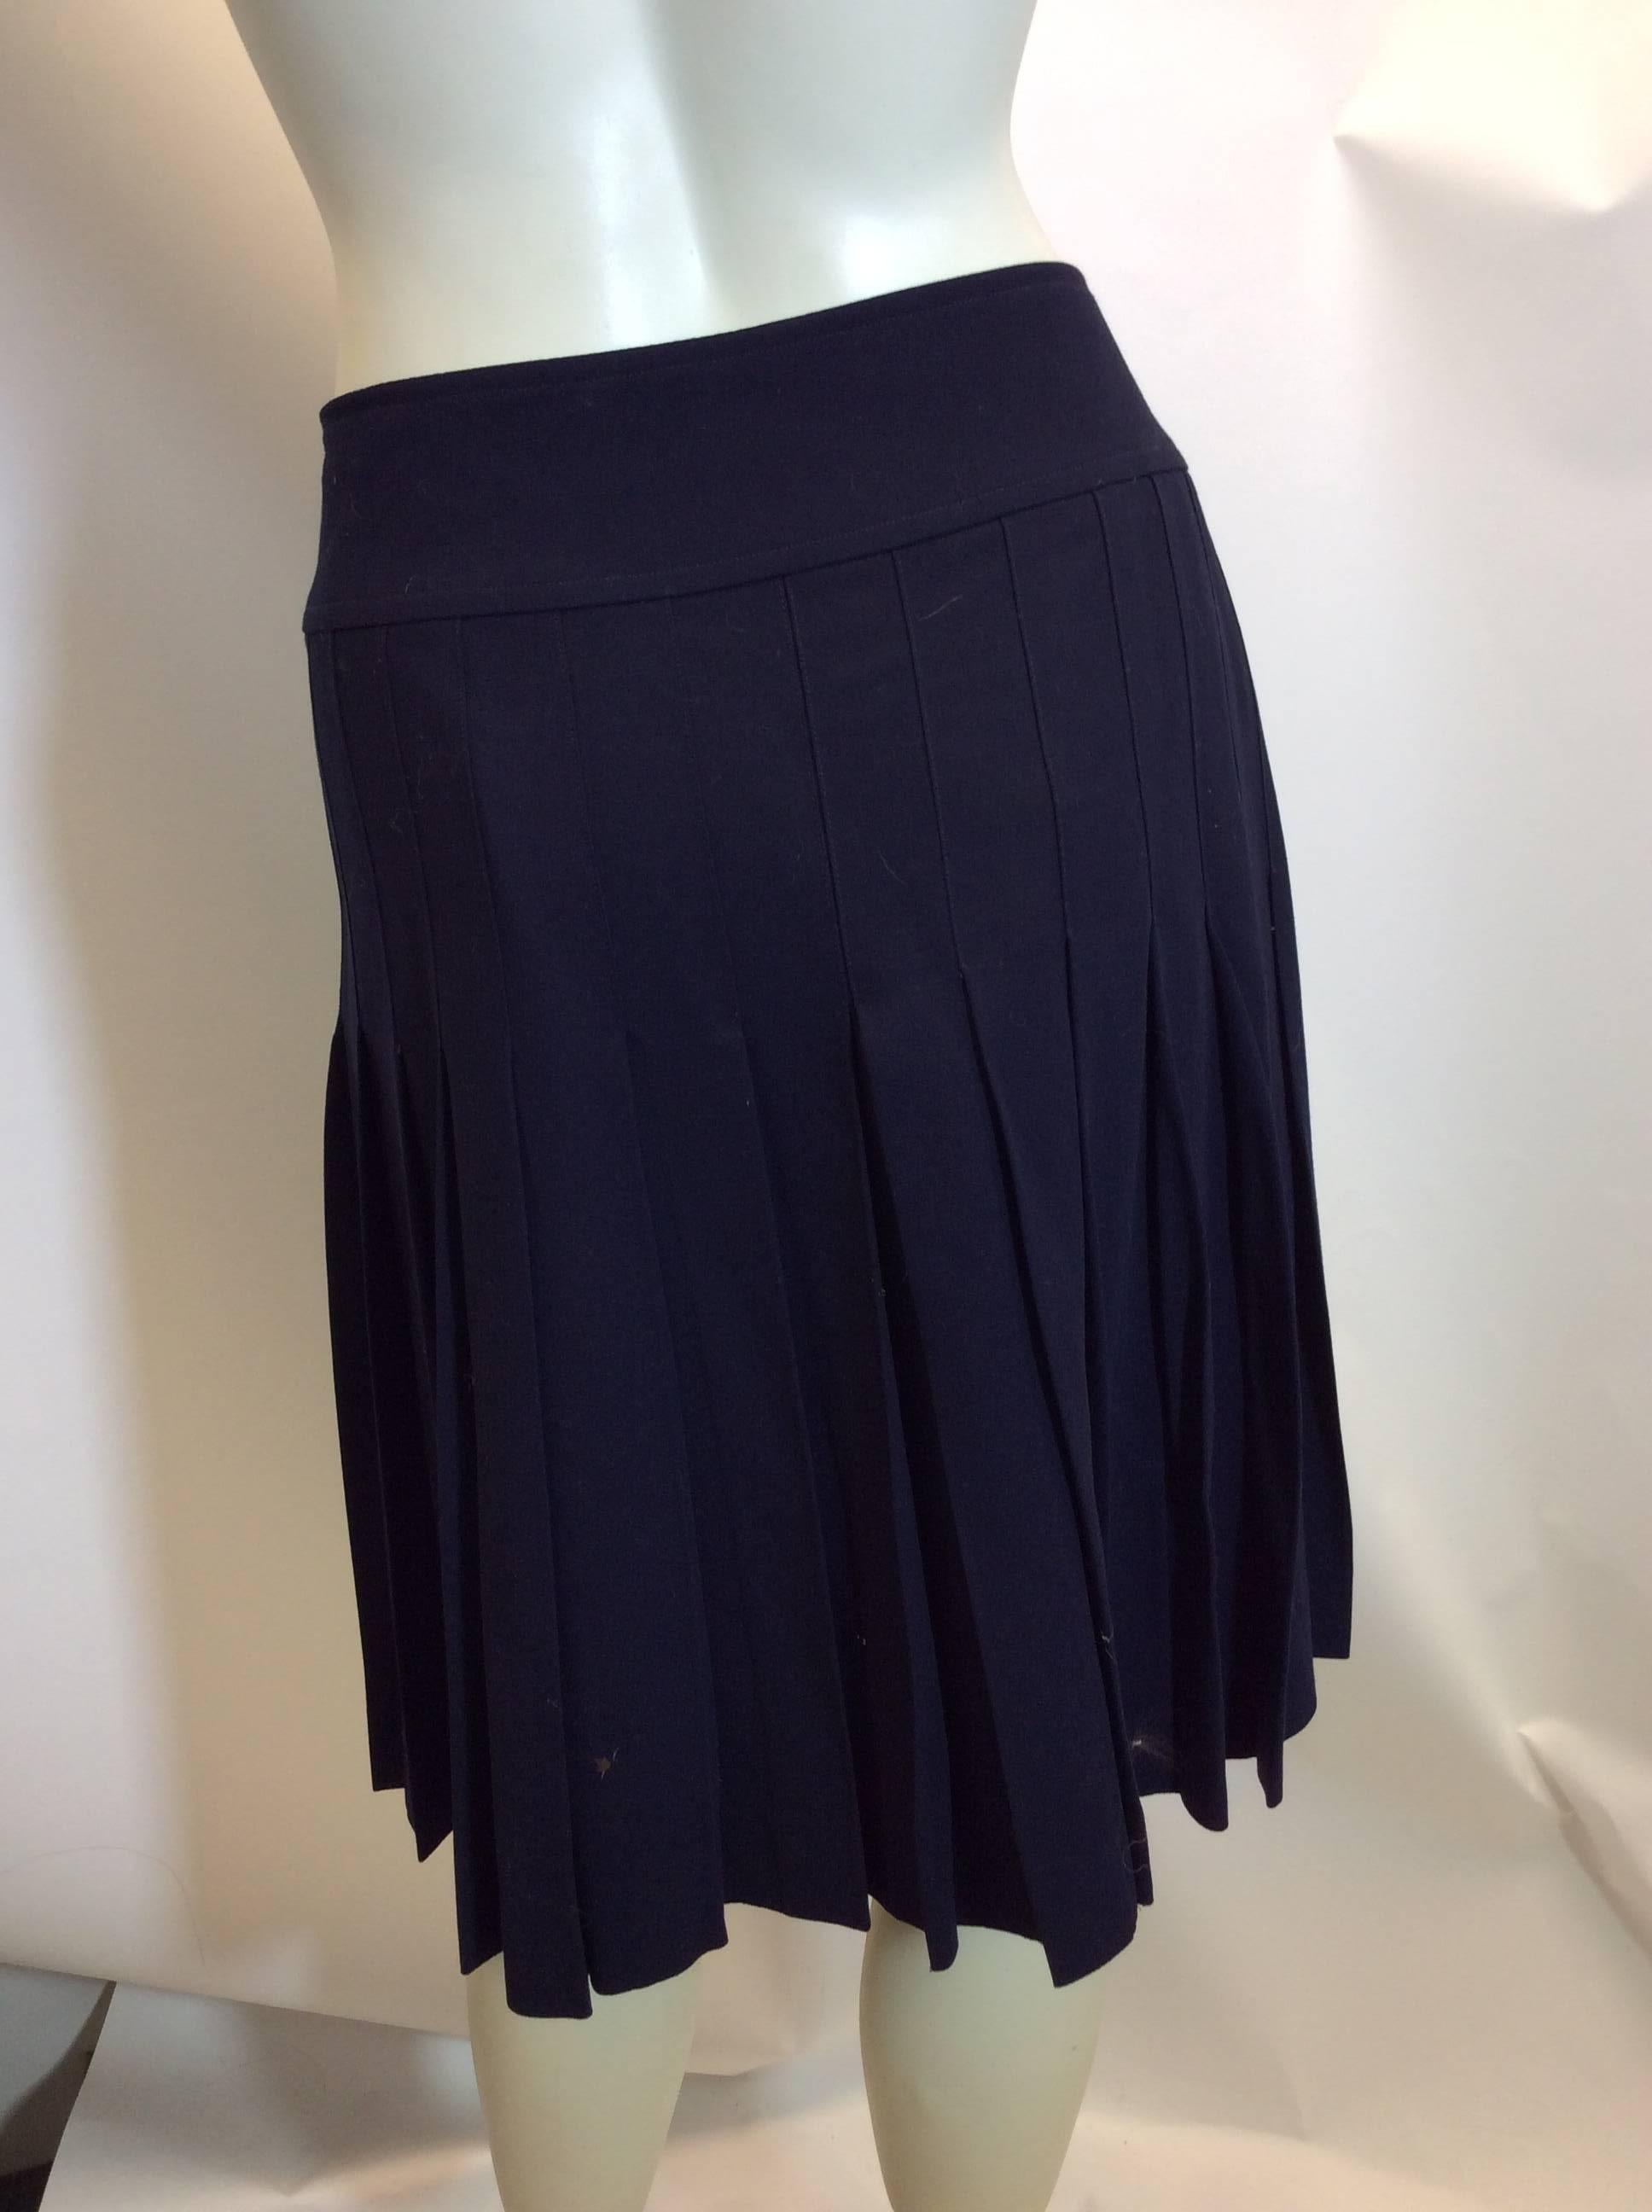 Chanel Navy Pleated Wool Skirt
$250
Beautiful Chanel buttons

